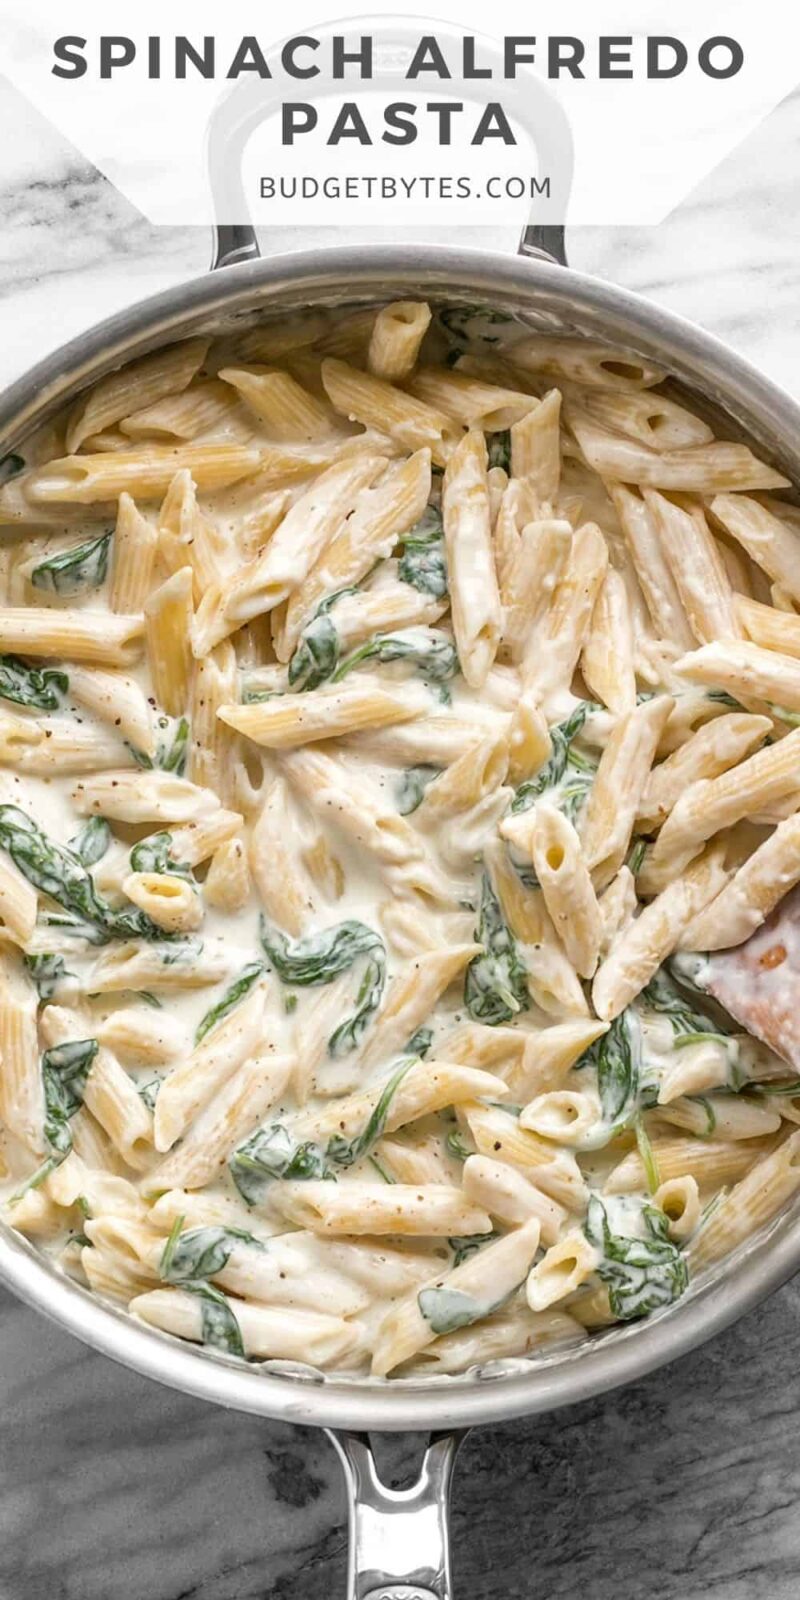 Overhead view of spinach alfredo pasta in the skillet.